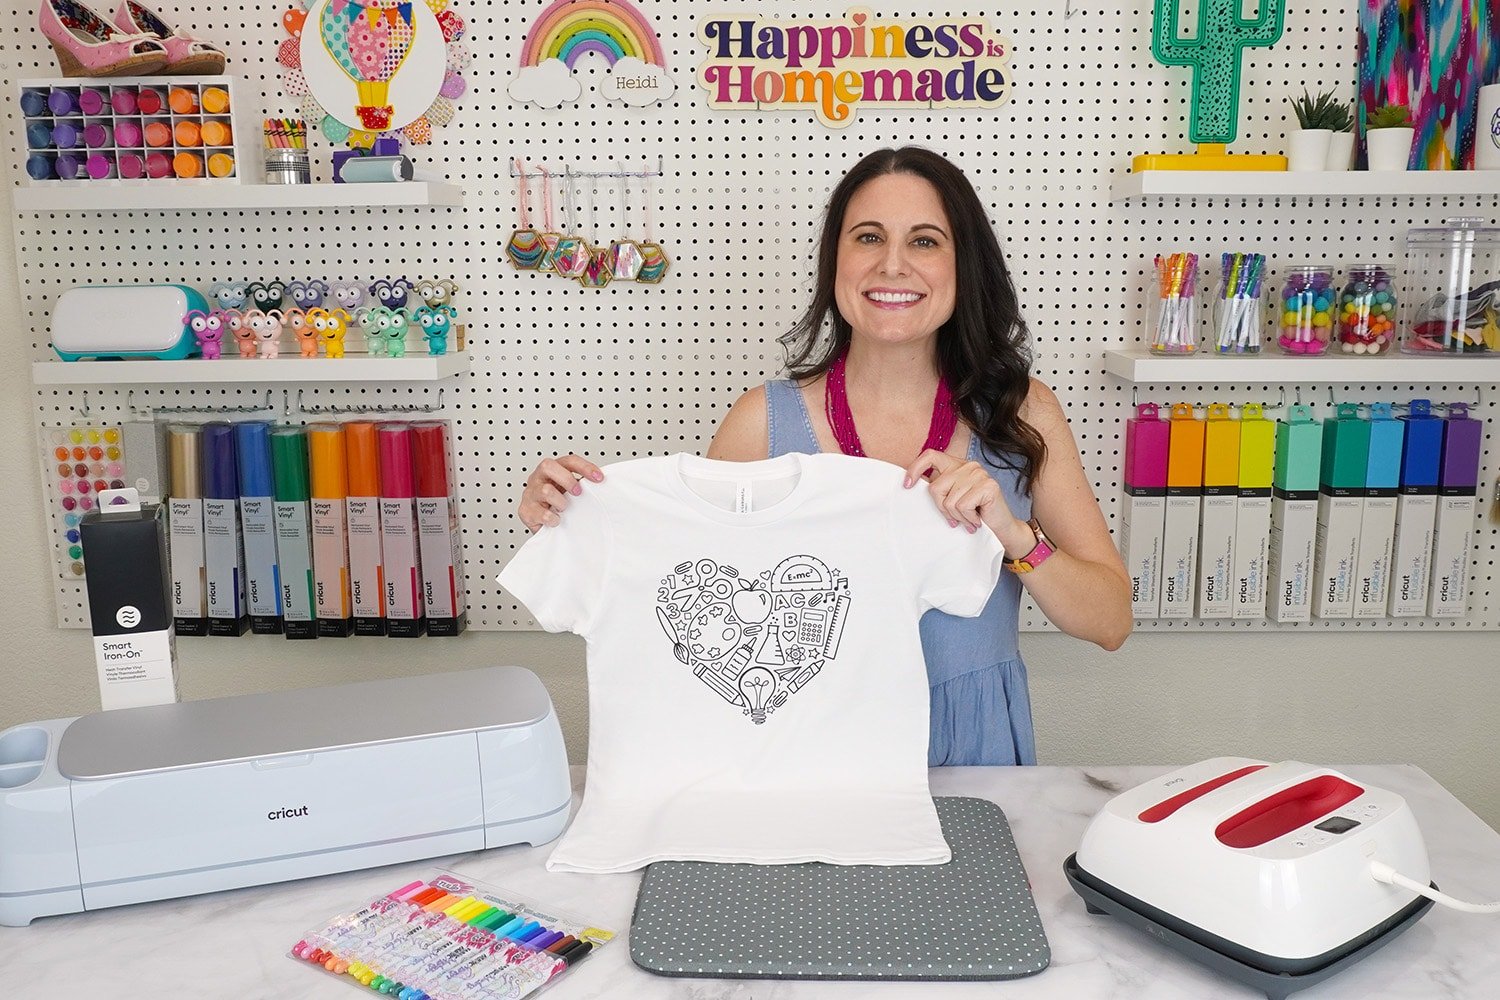 Heidi Holding Up Back to School Shirt in front of craft room pegboard of colorful supplies